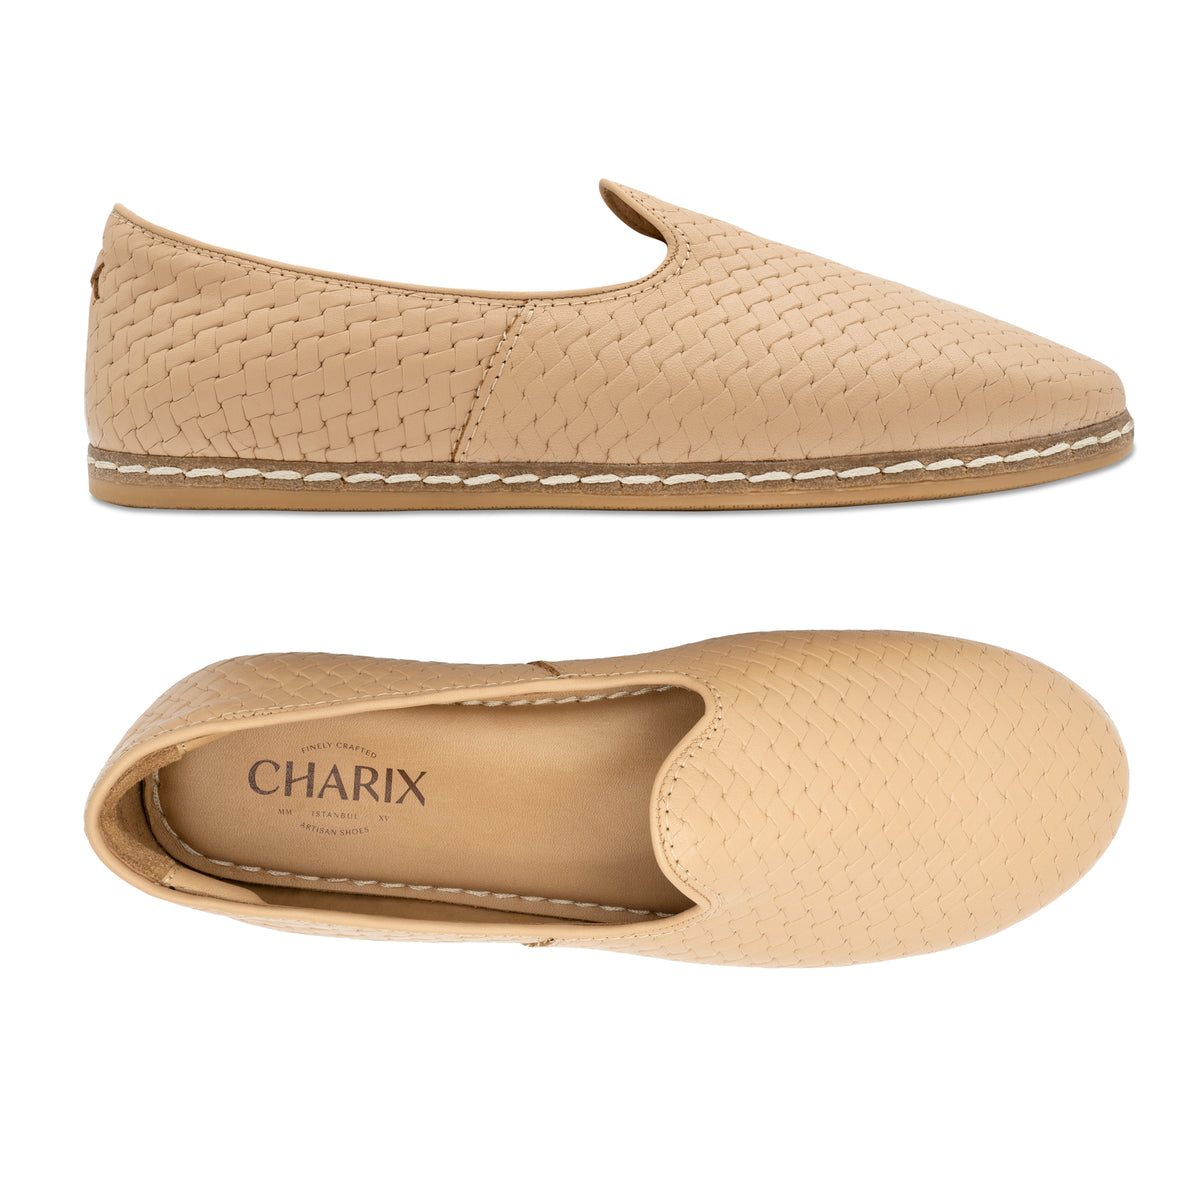 Woven Tan Slip Ons for Men - Charix Shoes